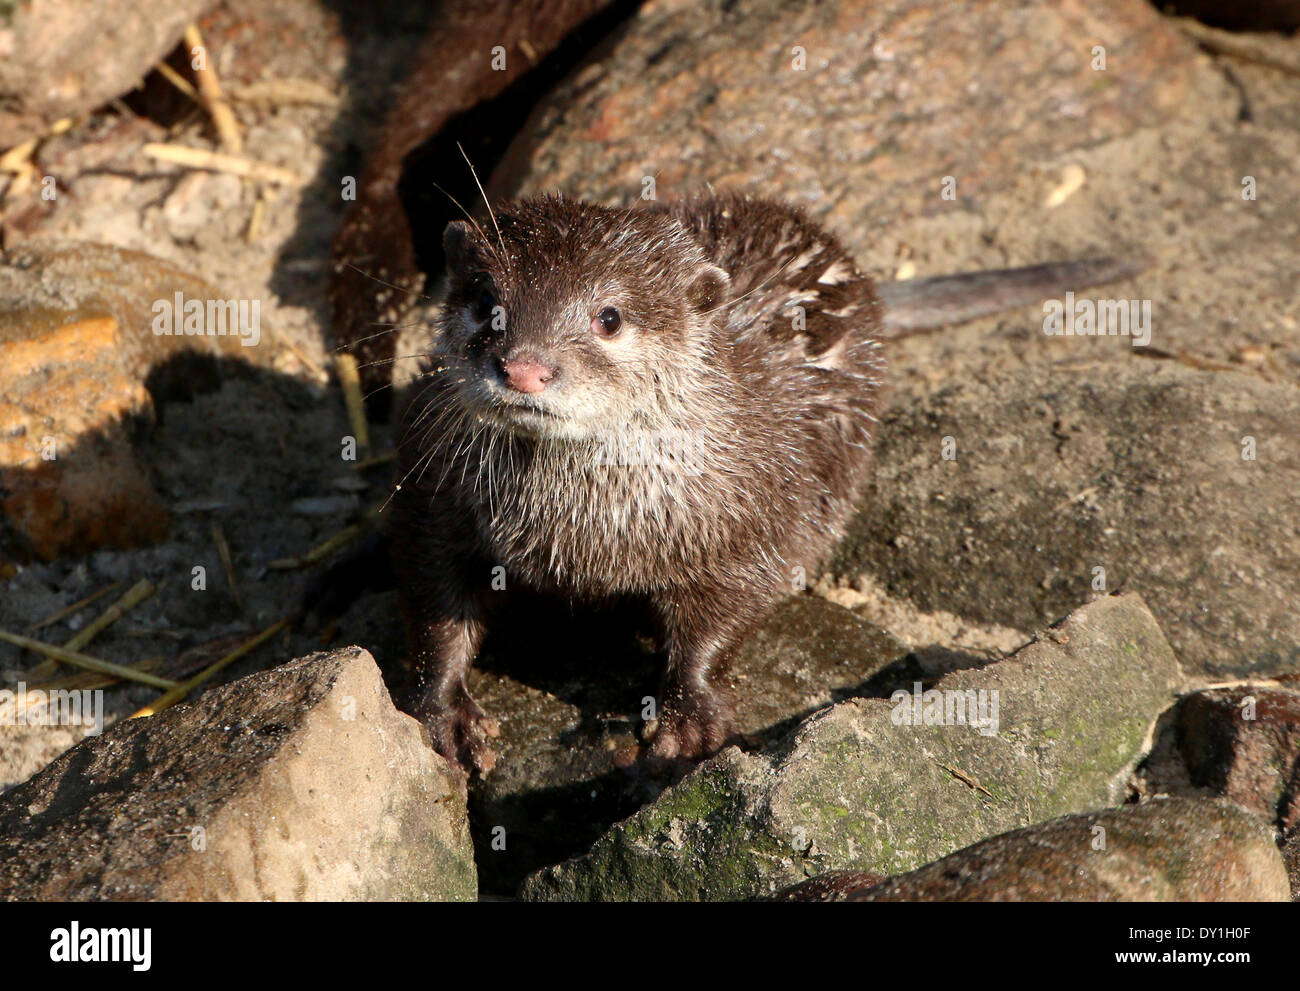 Oriental or Asian small-clawed otter  (Aonyx cinereus) in a zoo setting Stock Photo